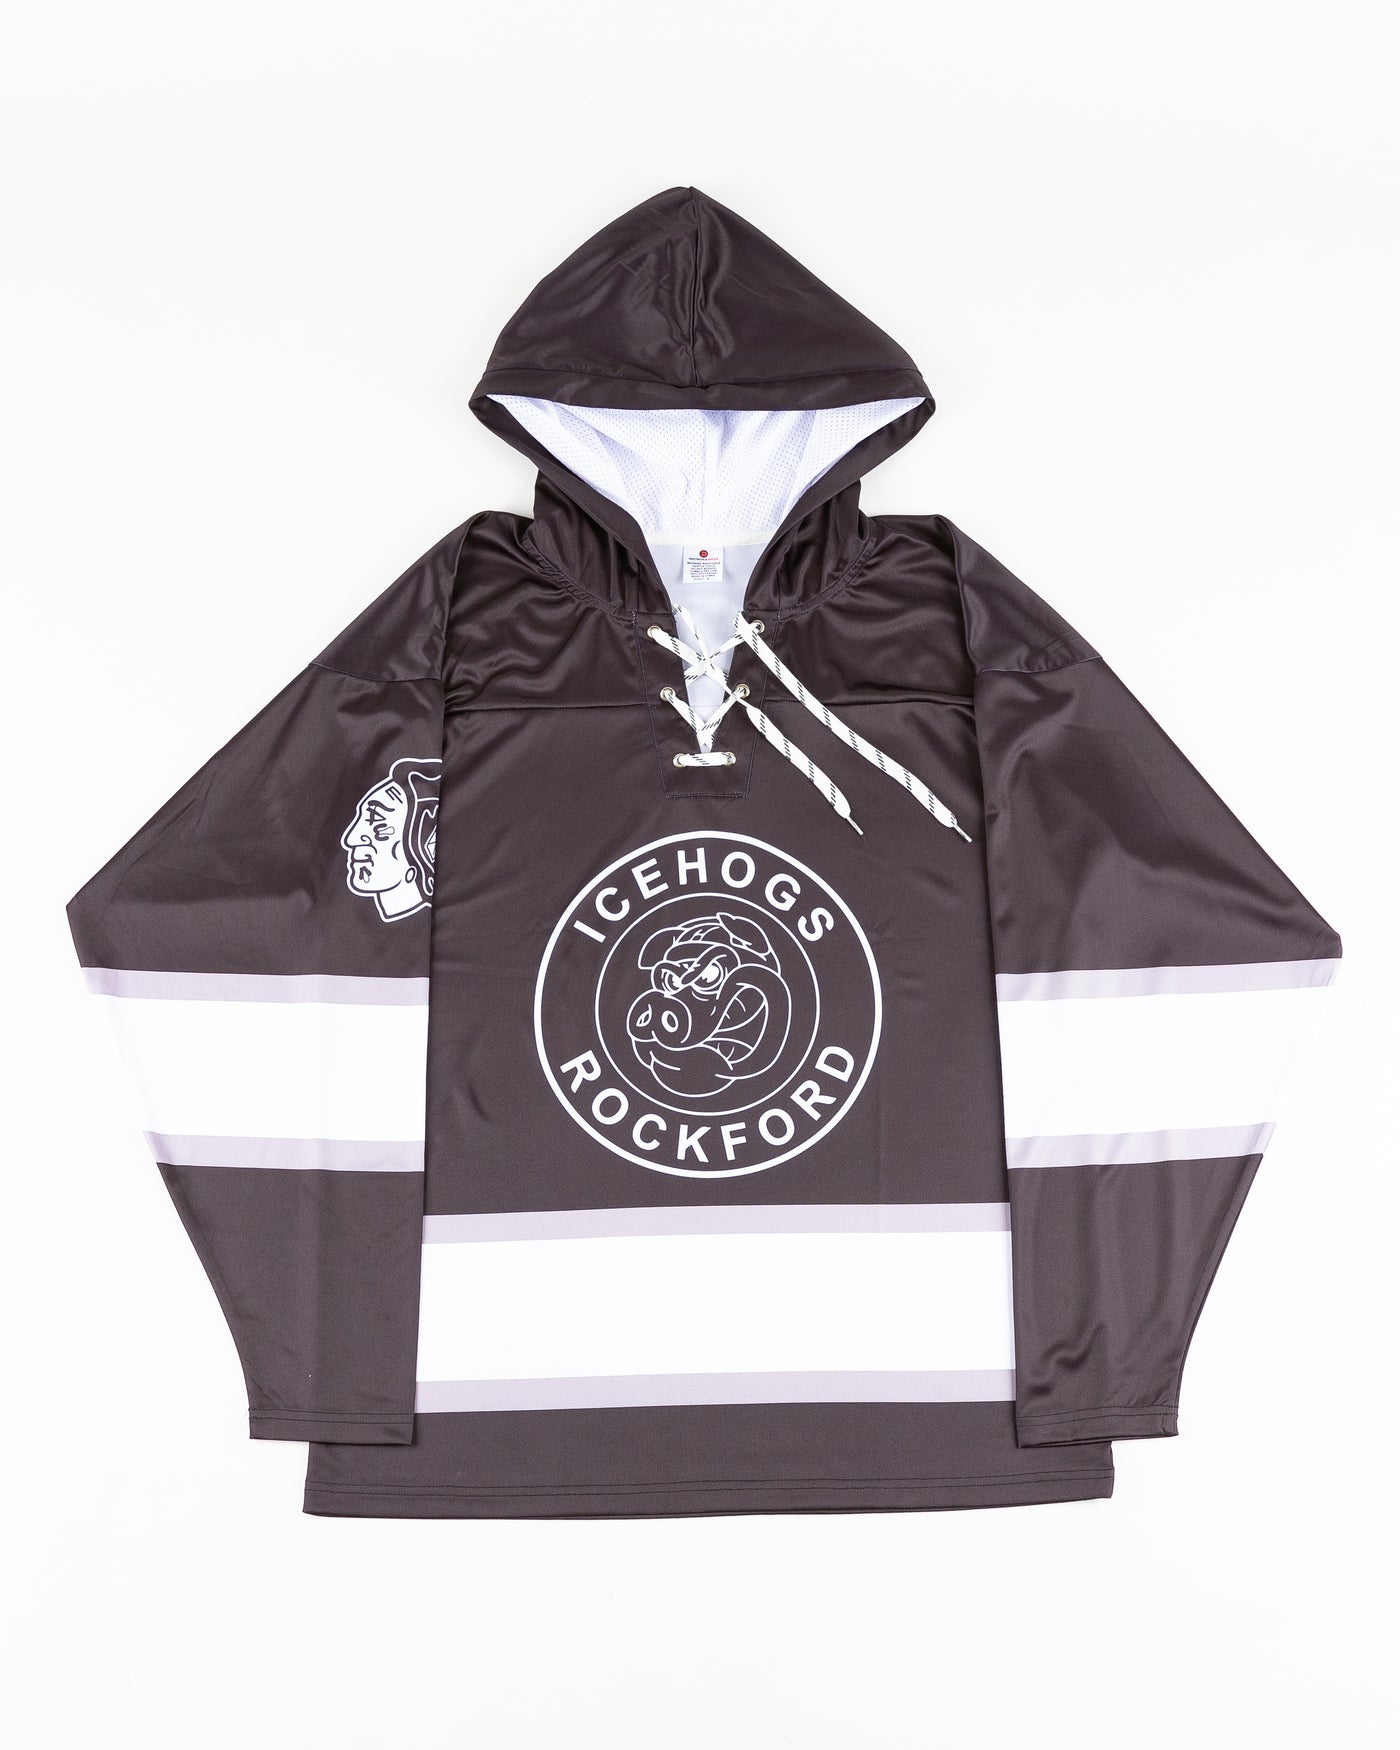 black and white Rockford IceHogs sublimated jersey hoodie - front lay flat